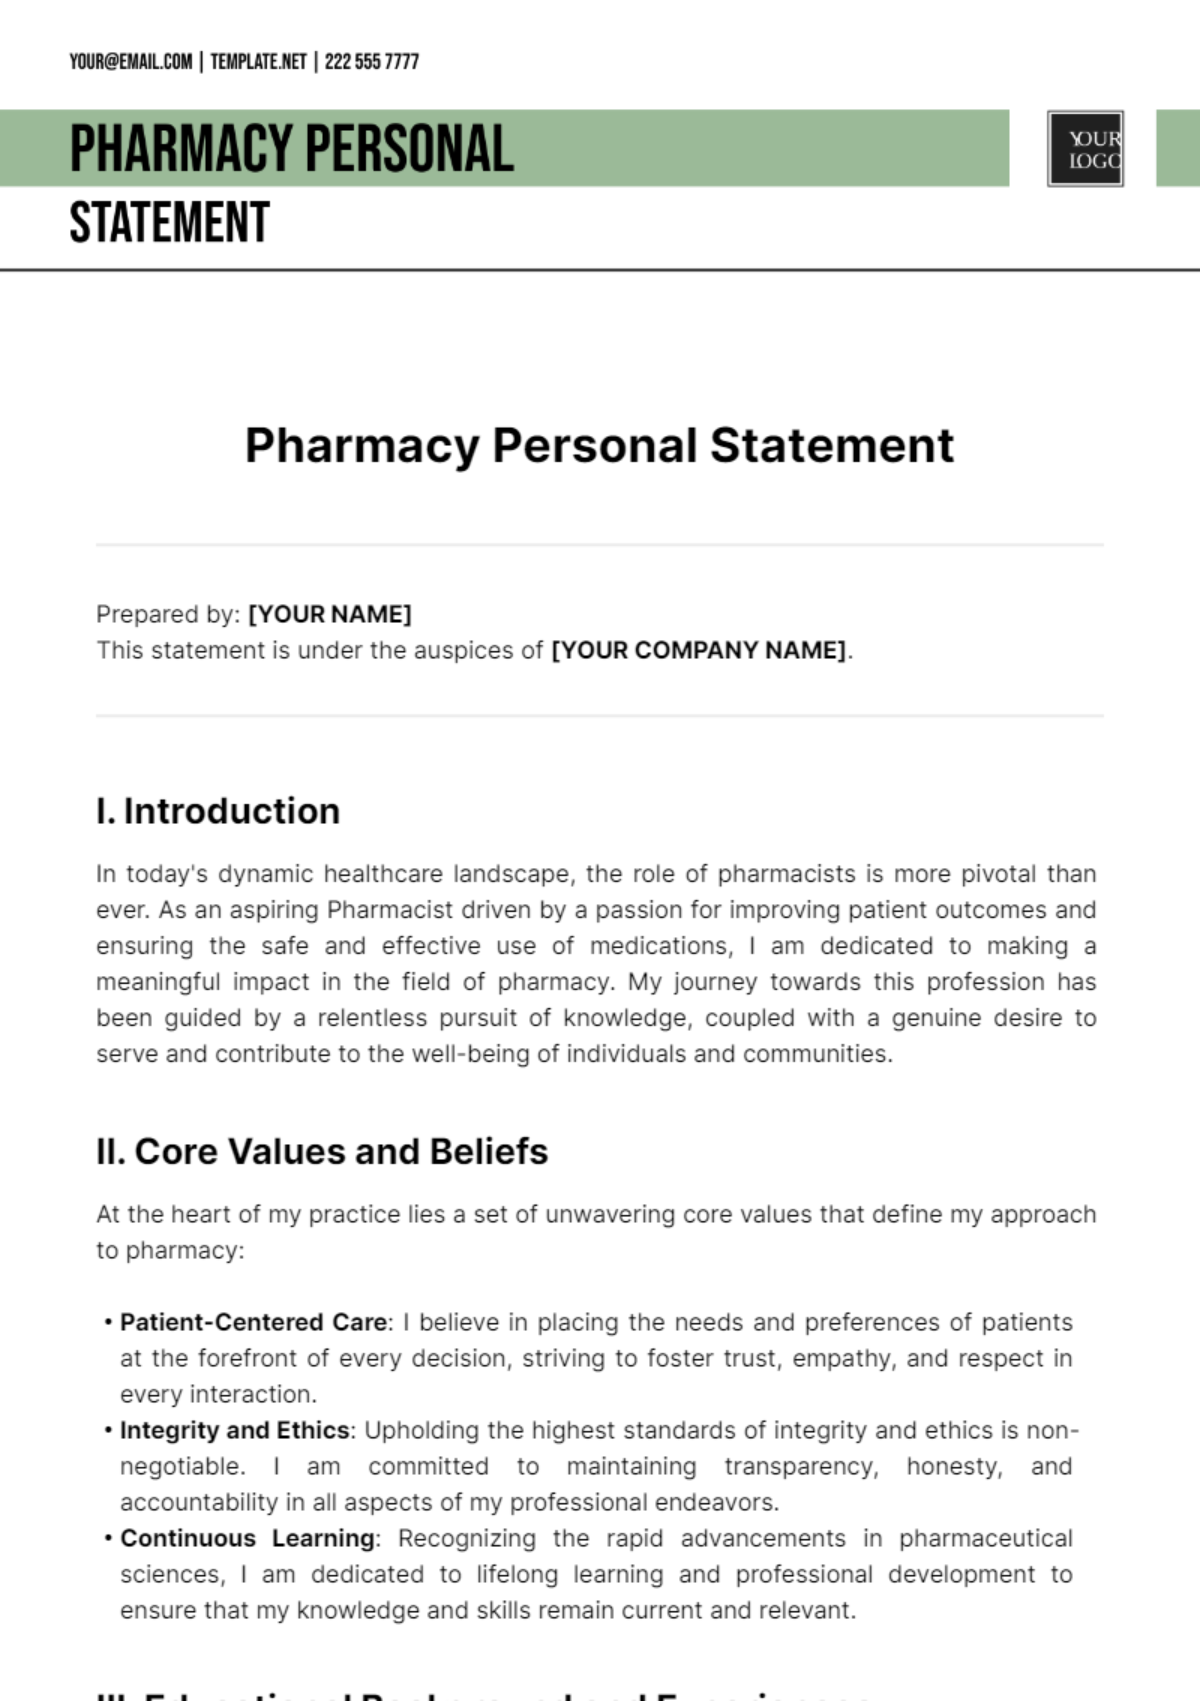 Pharmacy Personal Statement Template